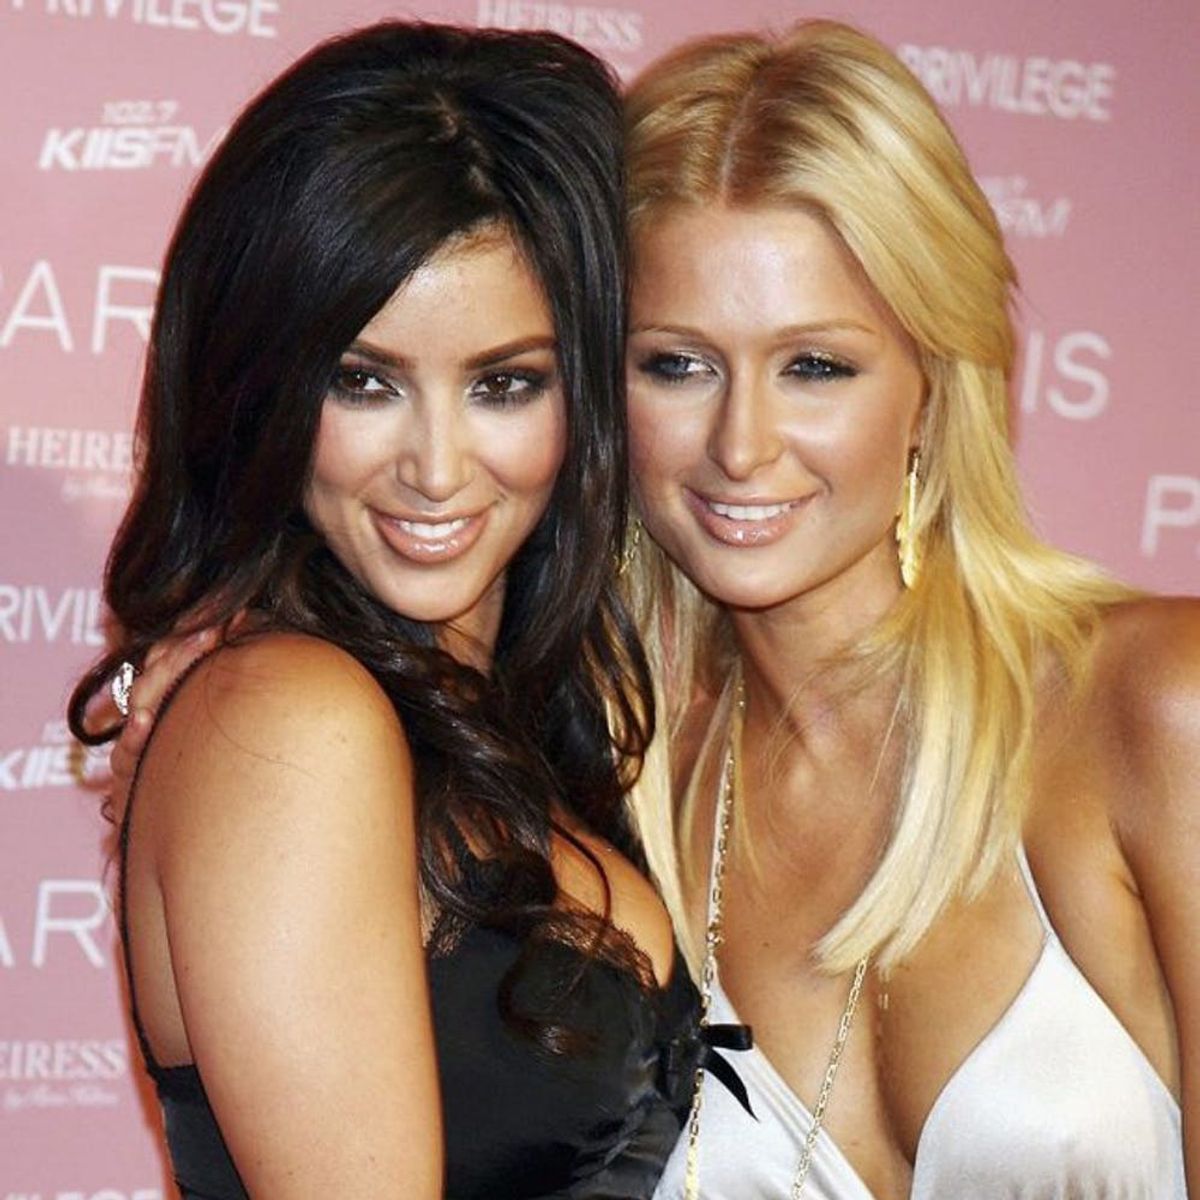 A Timeline of Unexpected Kardashian BFFs, from Paris Hilton and Beyond